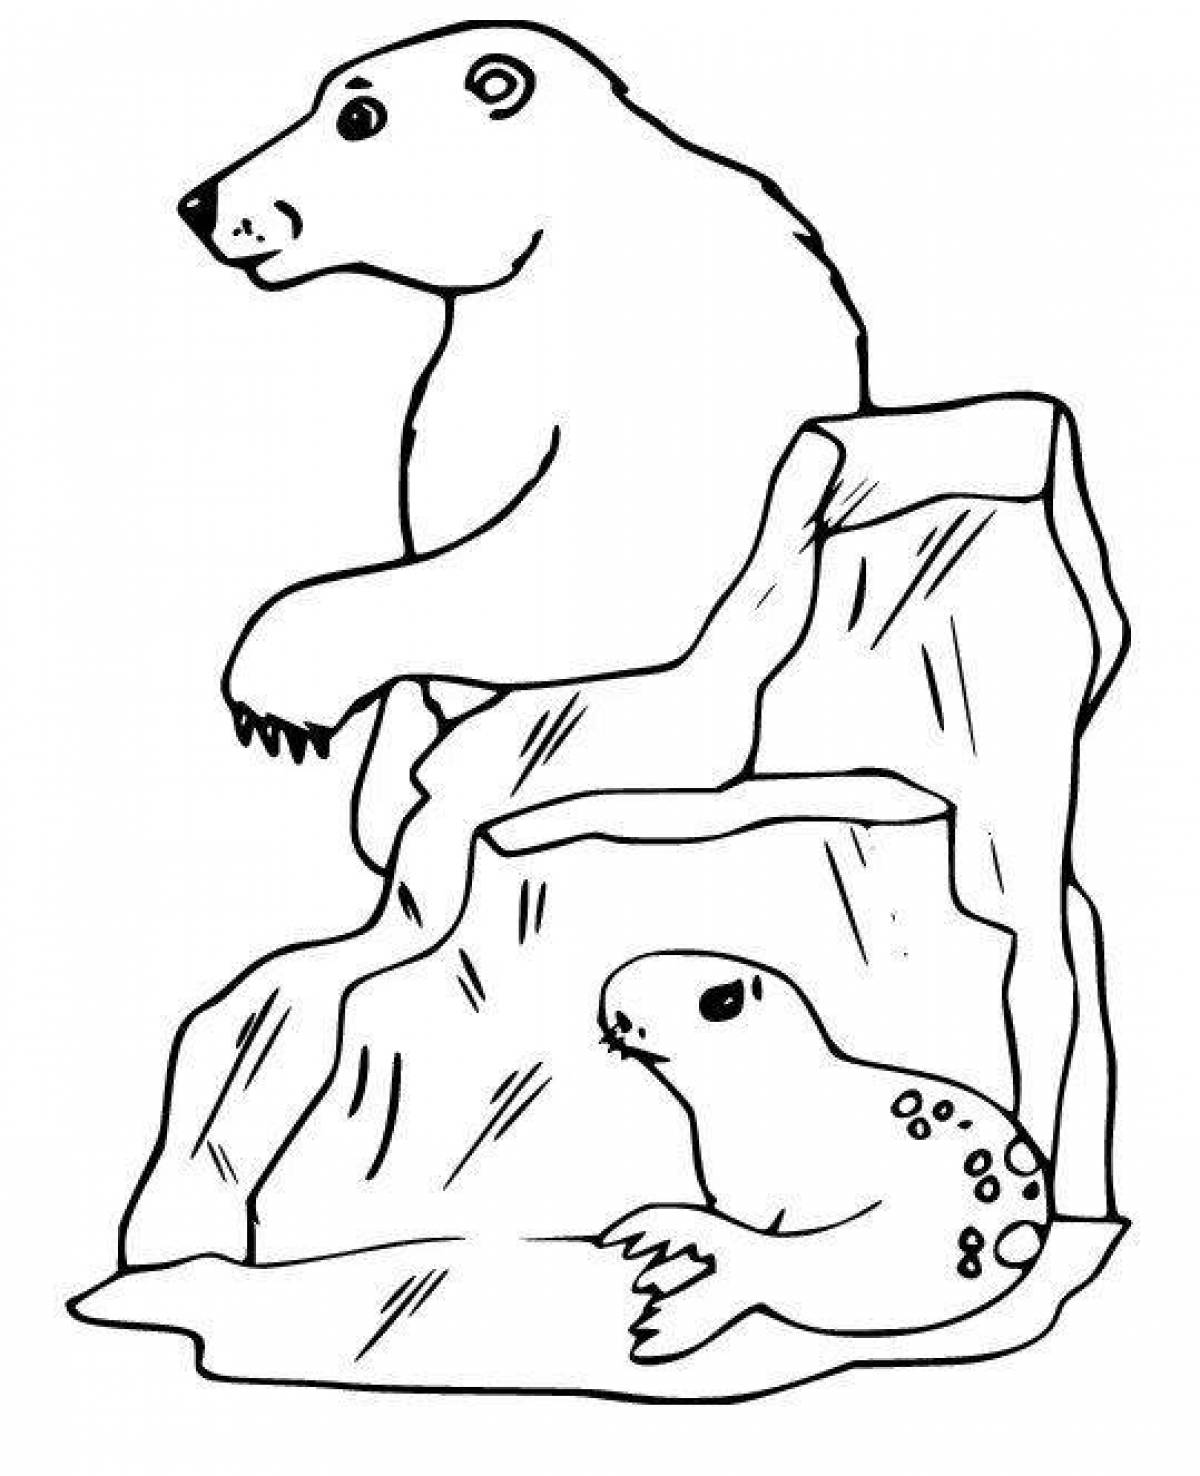 Animated coloring page of northern animals